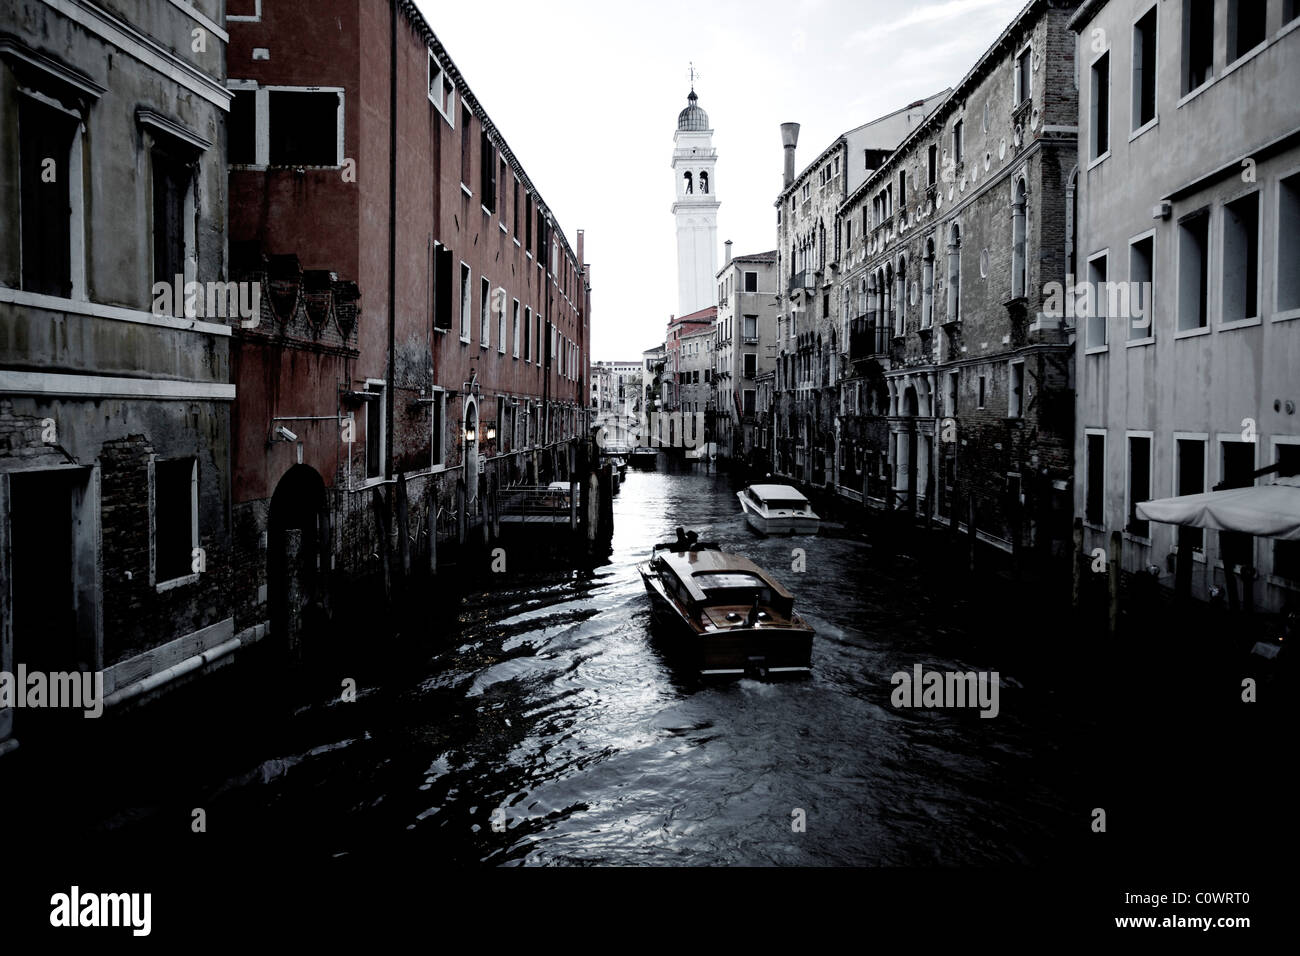 A venetian waterway in Venice Italy with a motorboat taxi commuting on it. Stock Photo